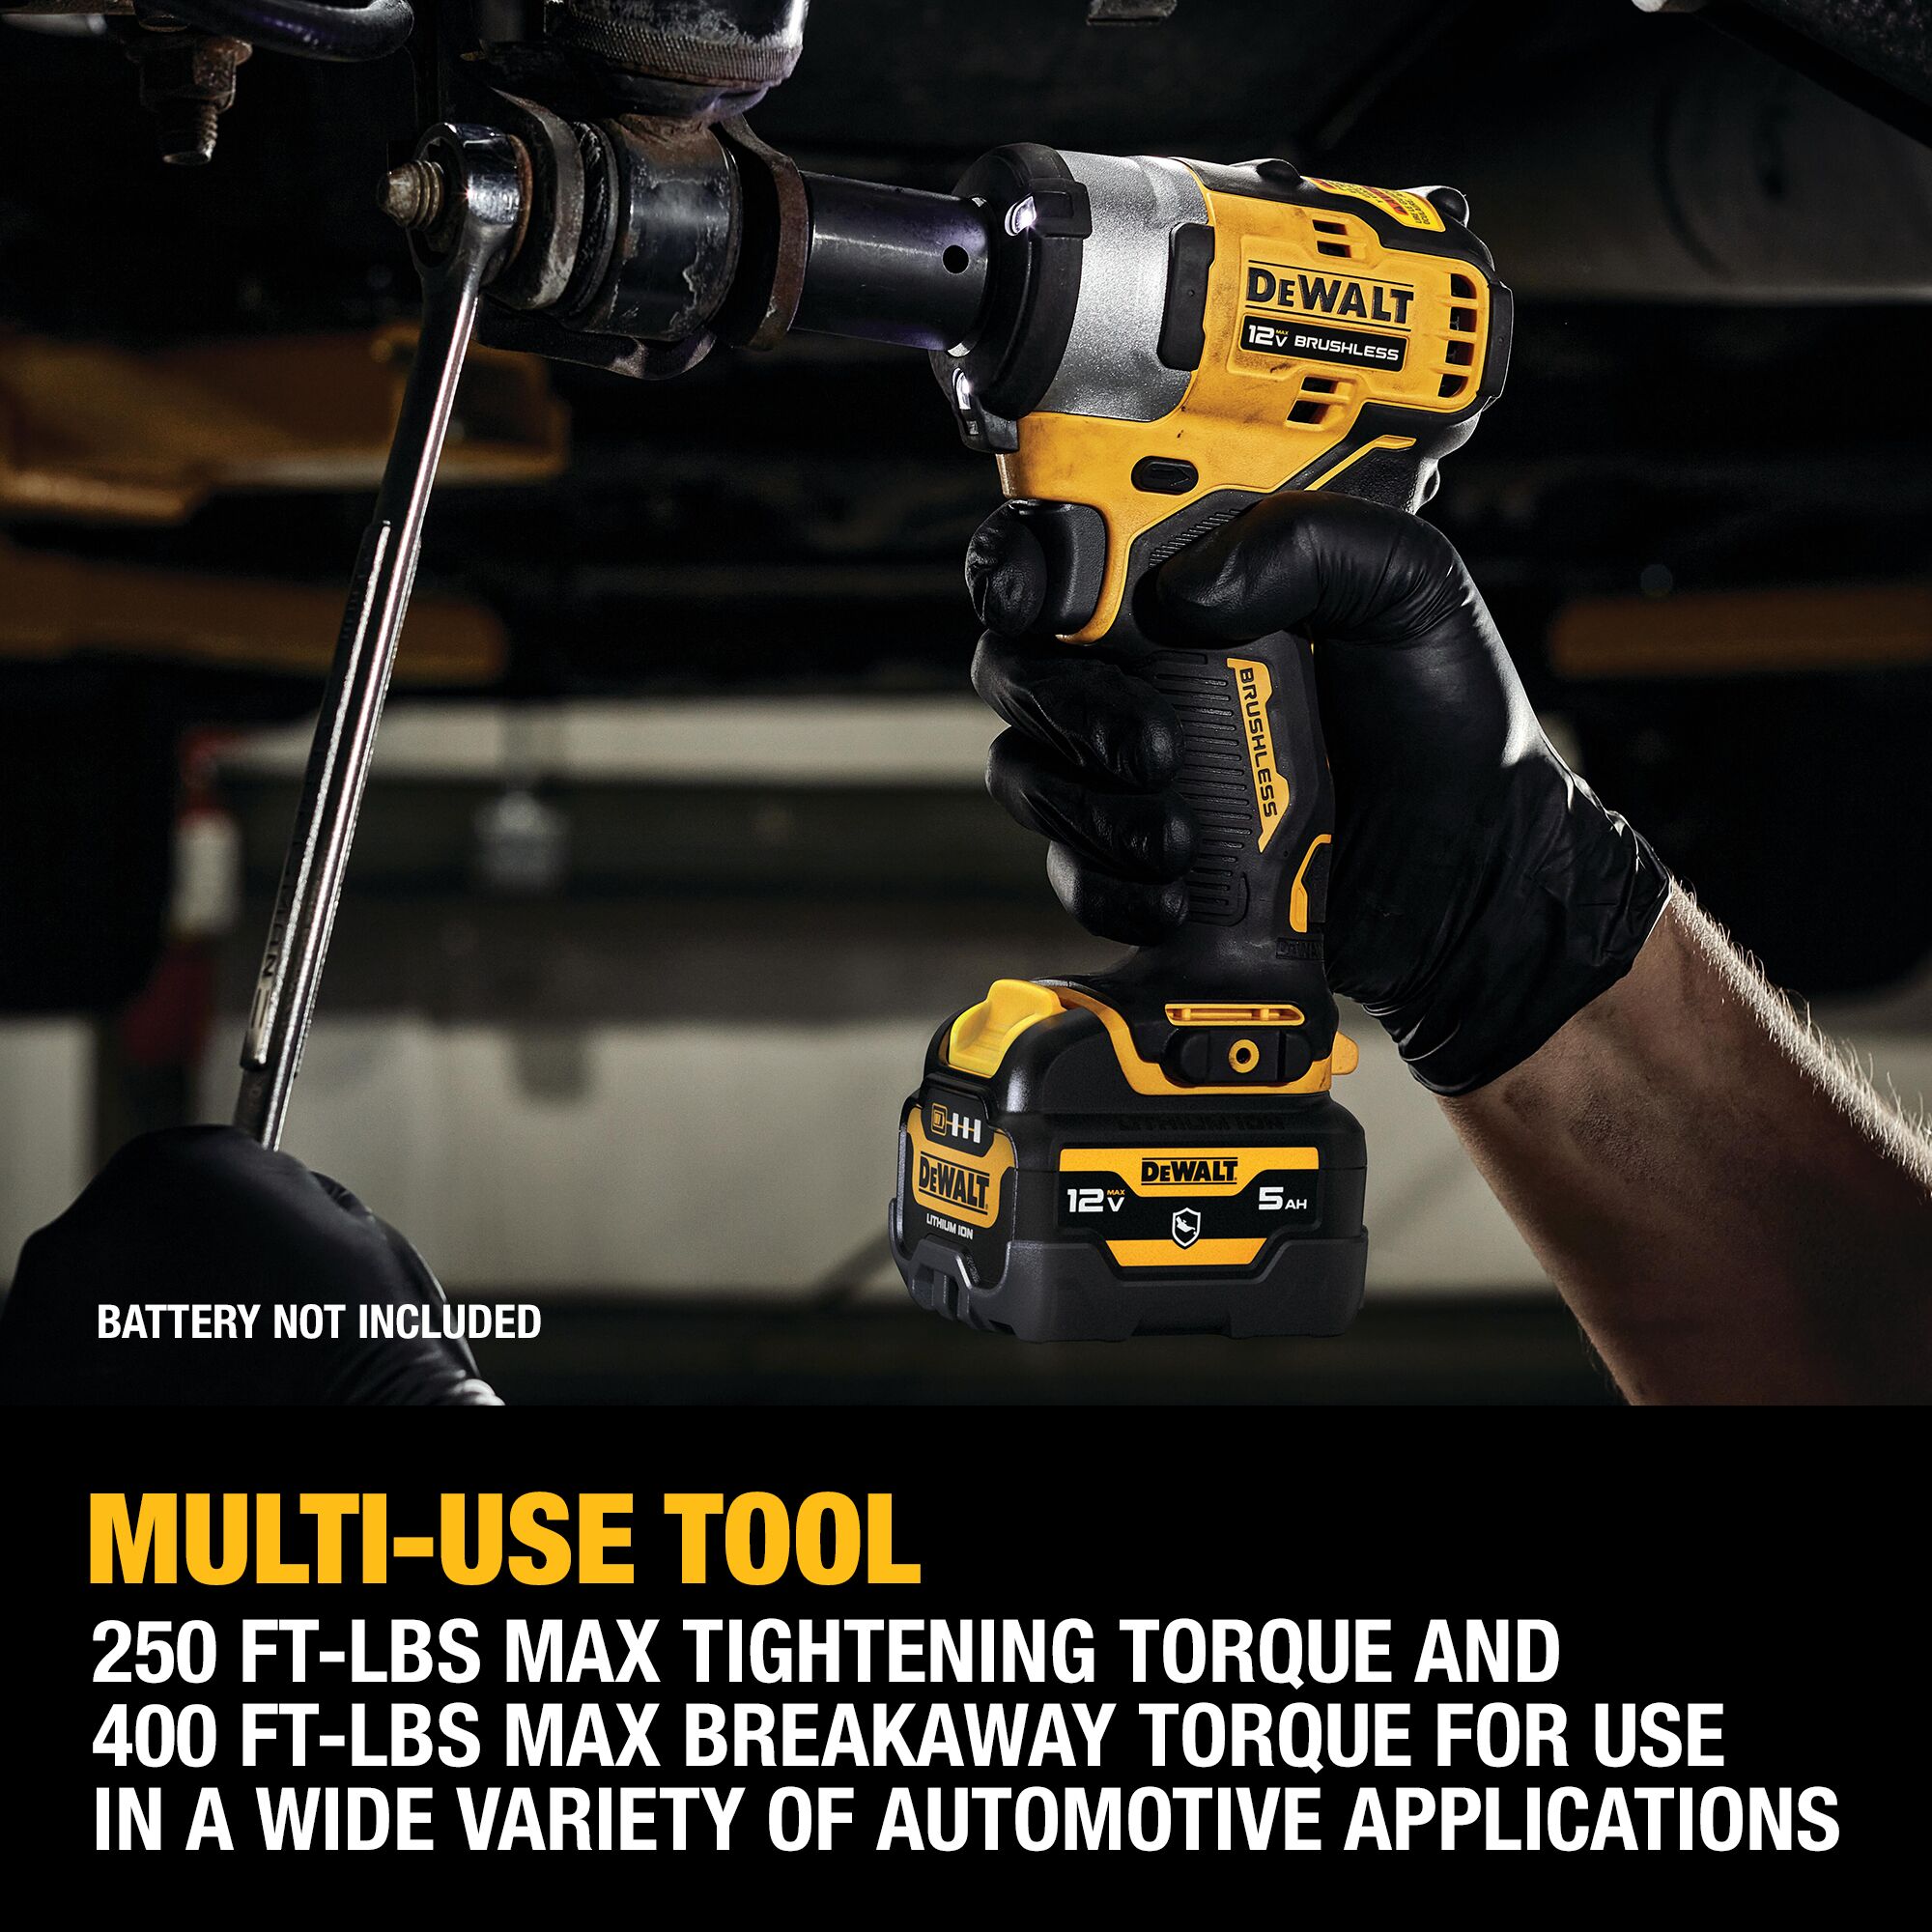 DEWALT XTREME 12-volt Max Variable Speed Brushless 1/2-in Drive Cordless  Impact Wrench (Bare Tool) in the Impact Wrenches department at